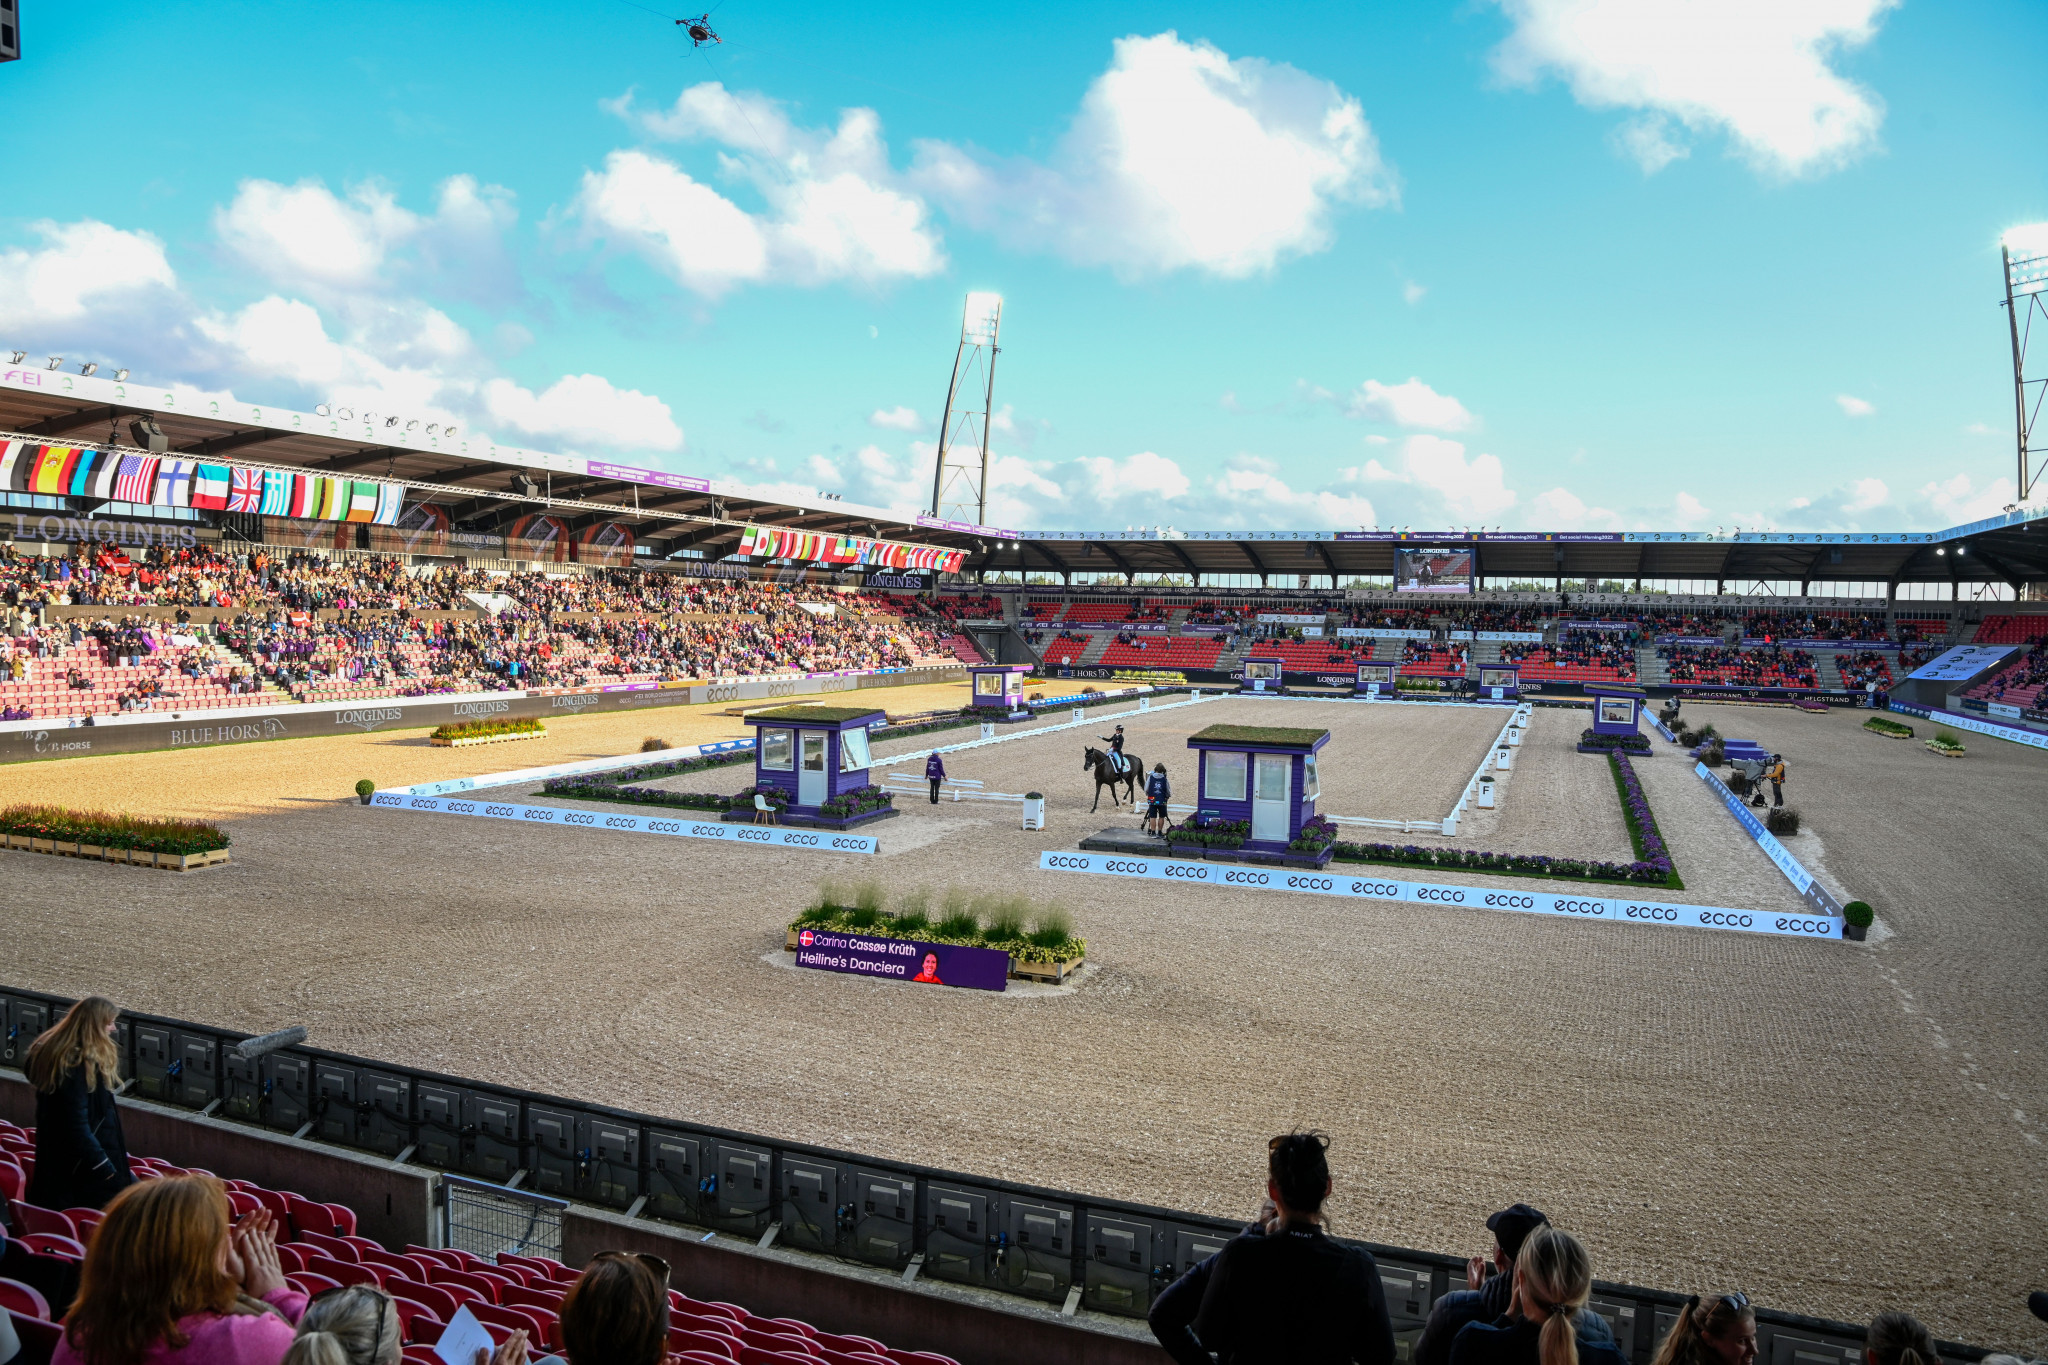 The Stutteri Ask Stadium is the main venue being used for the FEI World Championships ©Kolorit Media